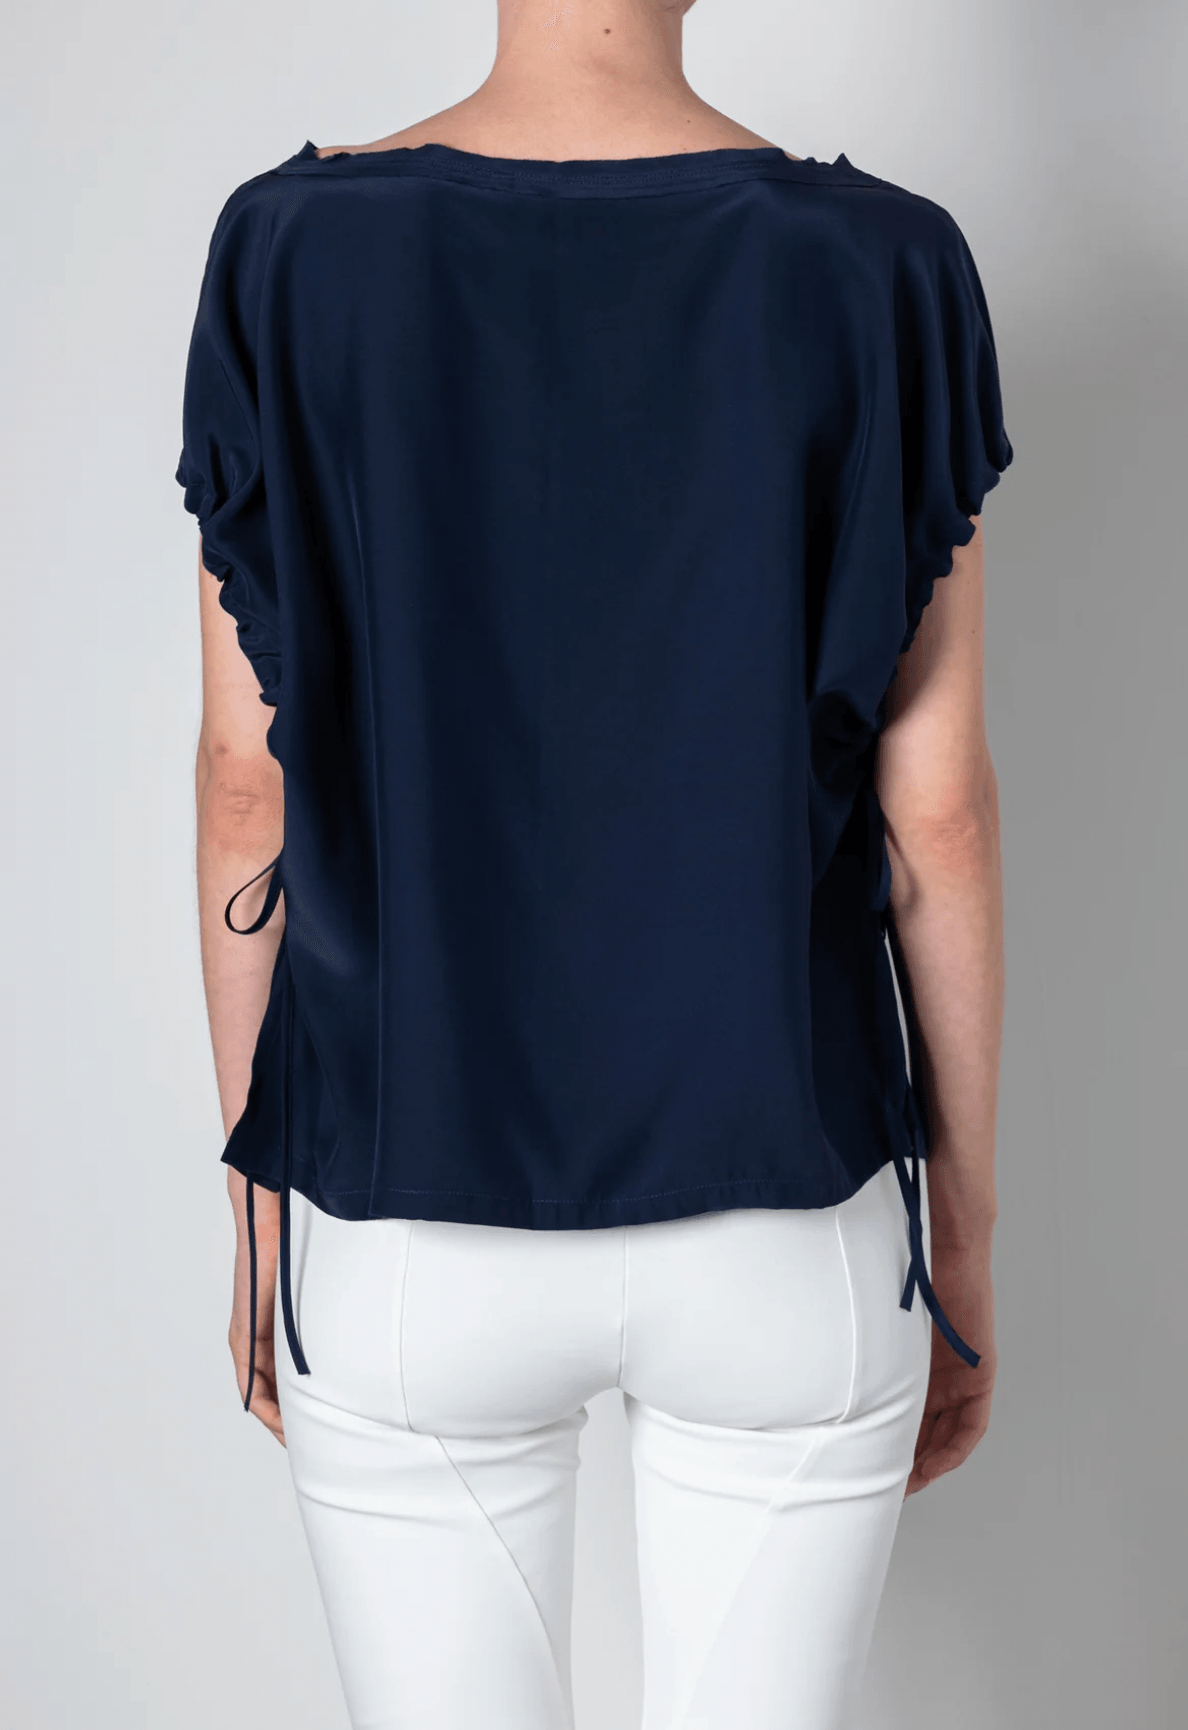 Silk Tee with Drawstrings by Elaine Kim - Haven